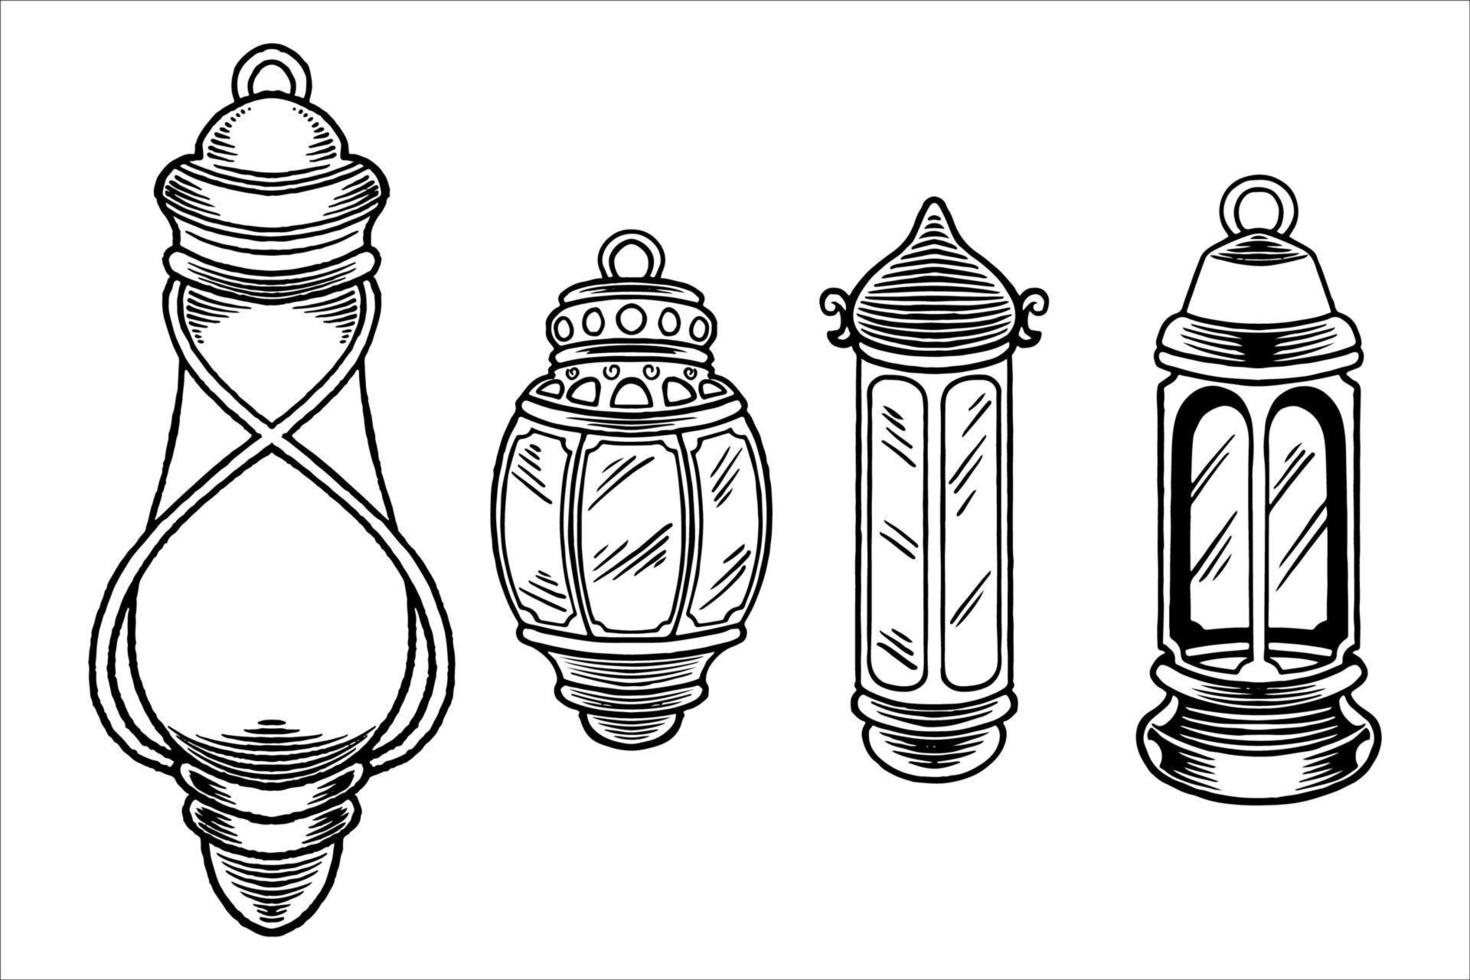 Hand drawn sketch of lanterns as islamic ornaments element vector